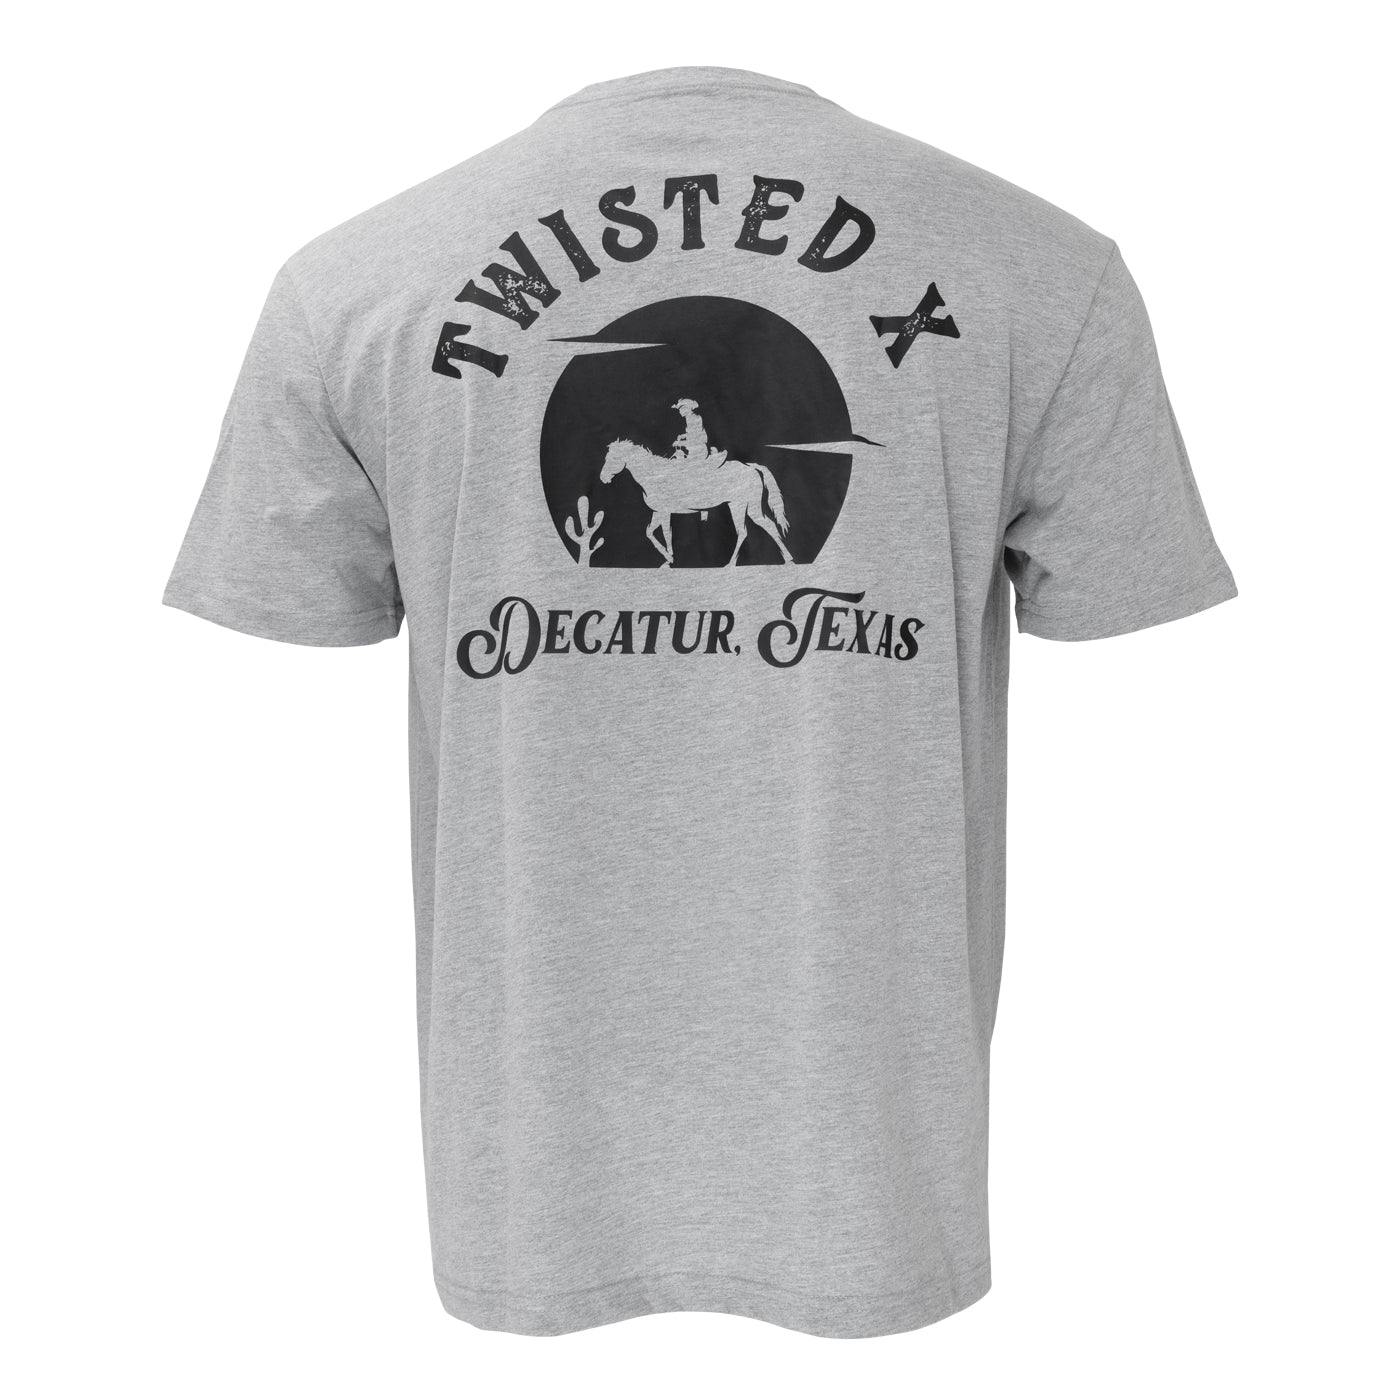 Twisted X Grey Horse T-Shirt